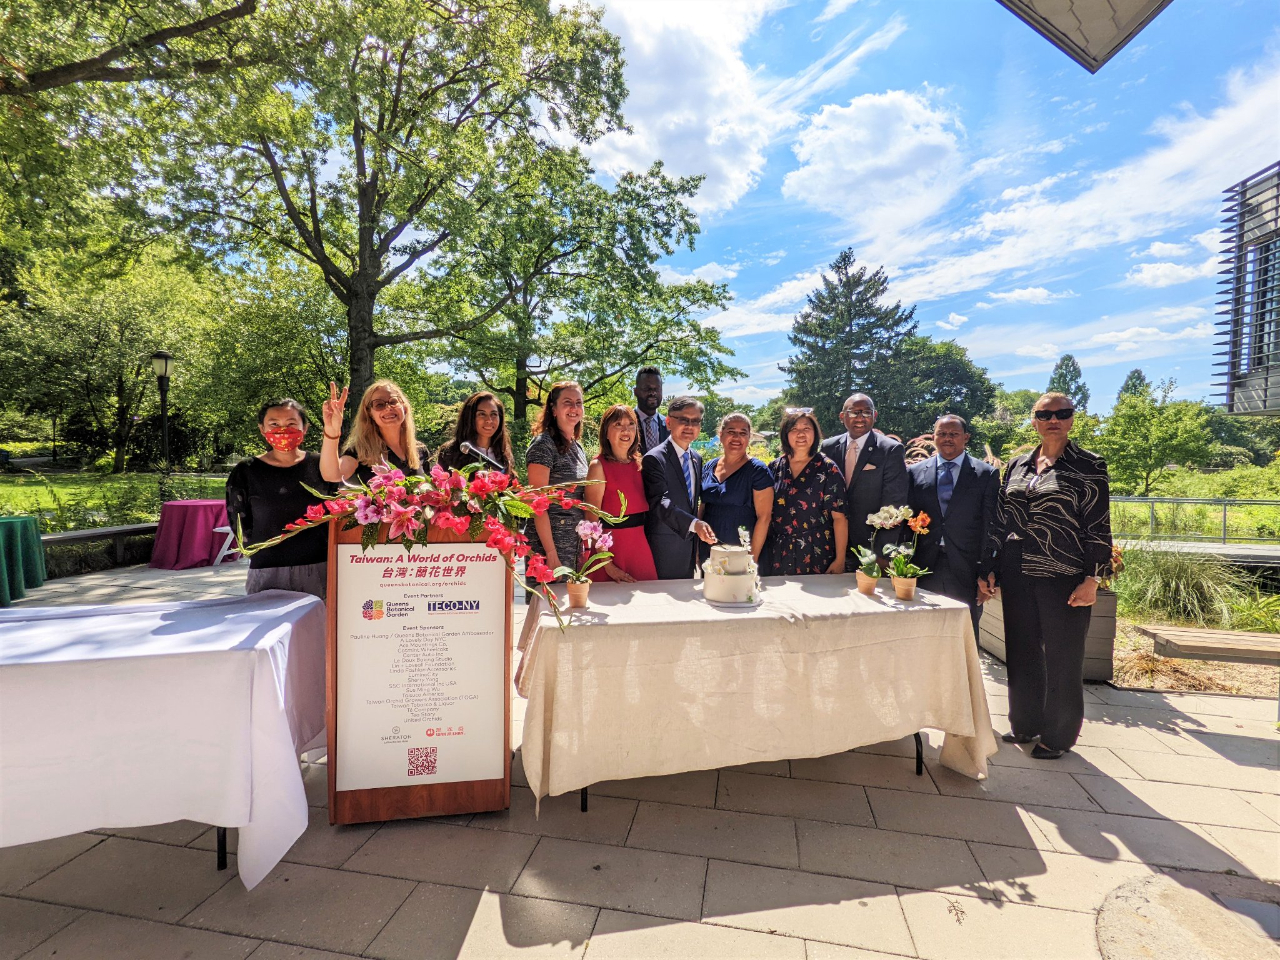 Ambassador James K. J. Lee attended the opening of the ninth annual Taiwan: A World of Orchids exhibition co-organized by TECO in New York and the Queens Botanical Garden from August 12-14, 2022.